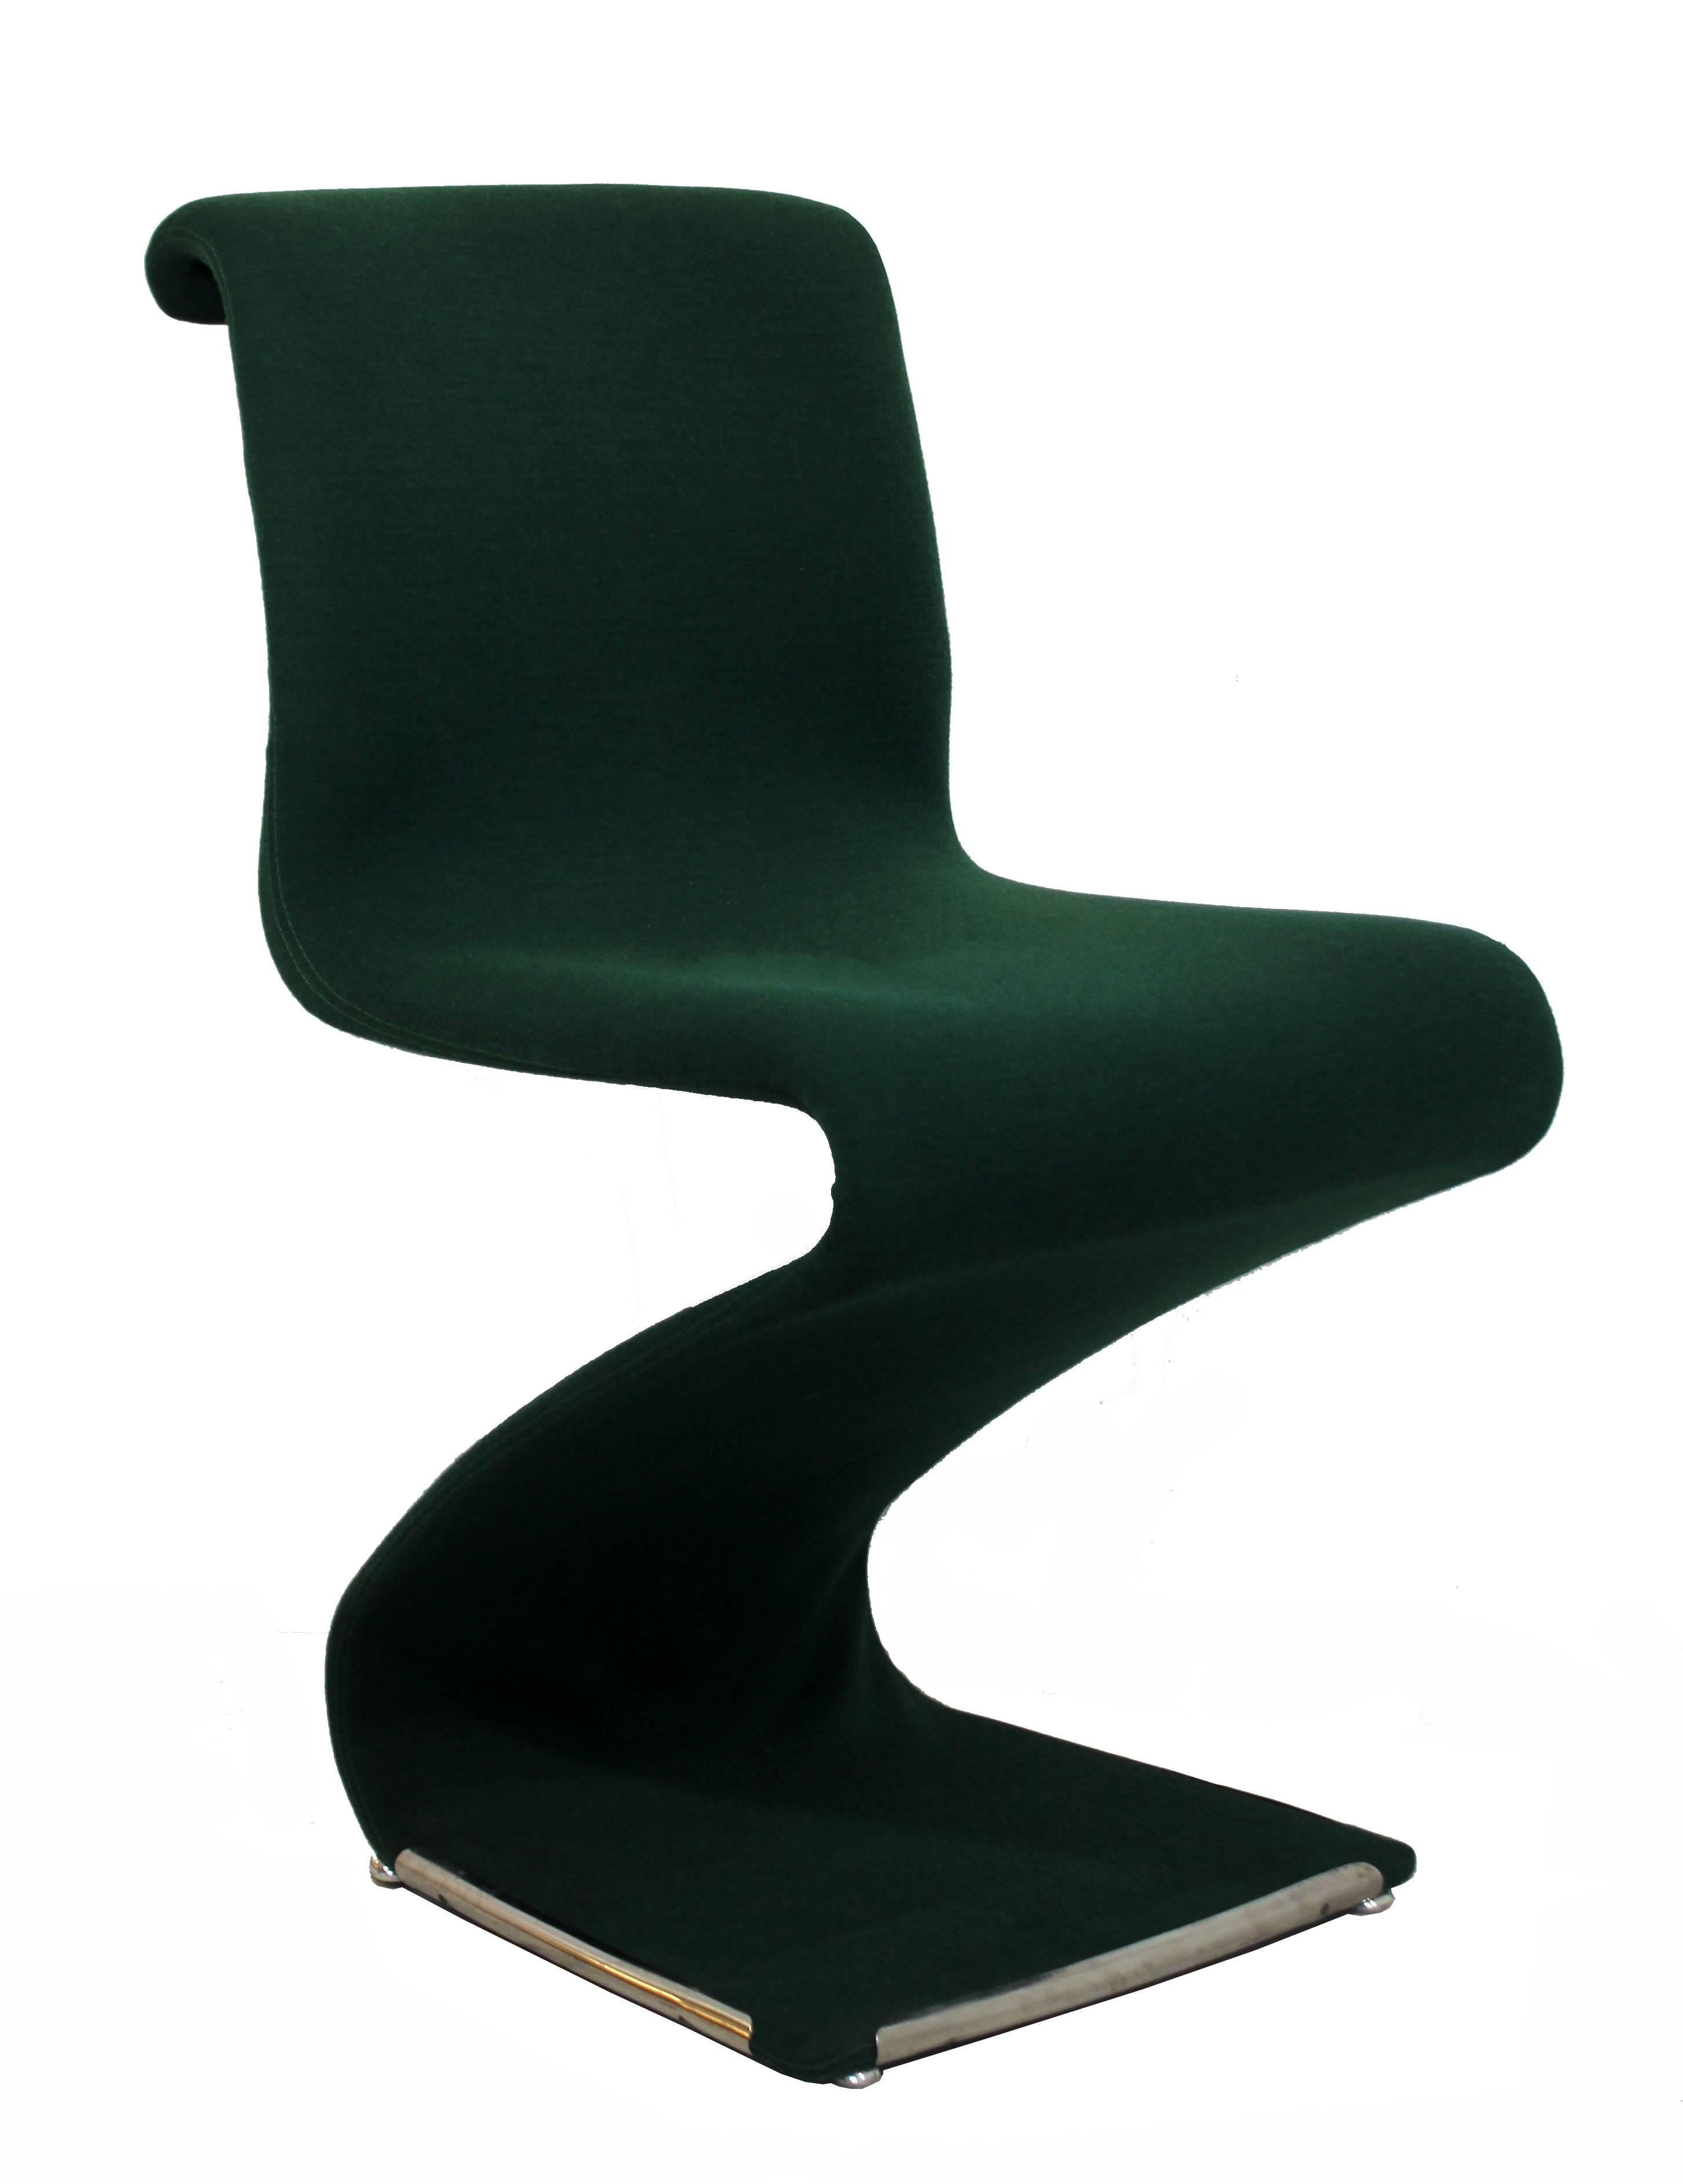 For your consideration is a magnificent set of eight, cantilever, side dining chairs, covered in forest green fabric by RIMA Linea for Italian company Disegno, circa the 1960s. In excellent condition. The dimensions are 18" Sq x 33" B.H. x